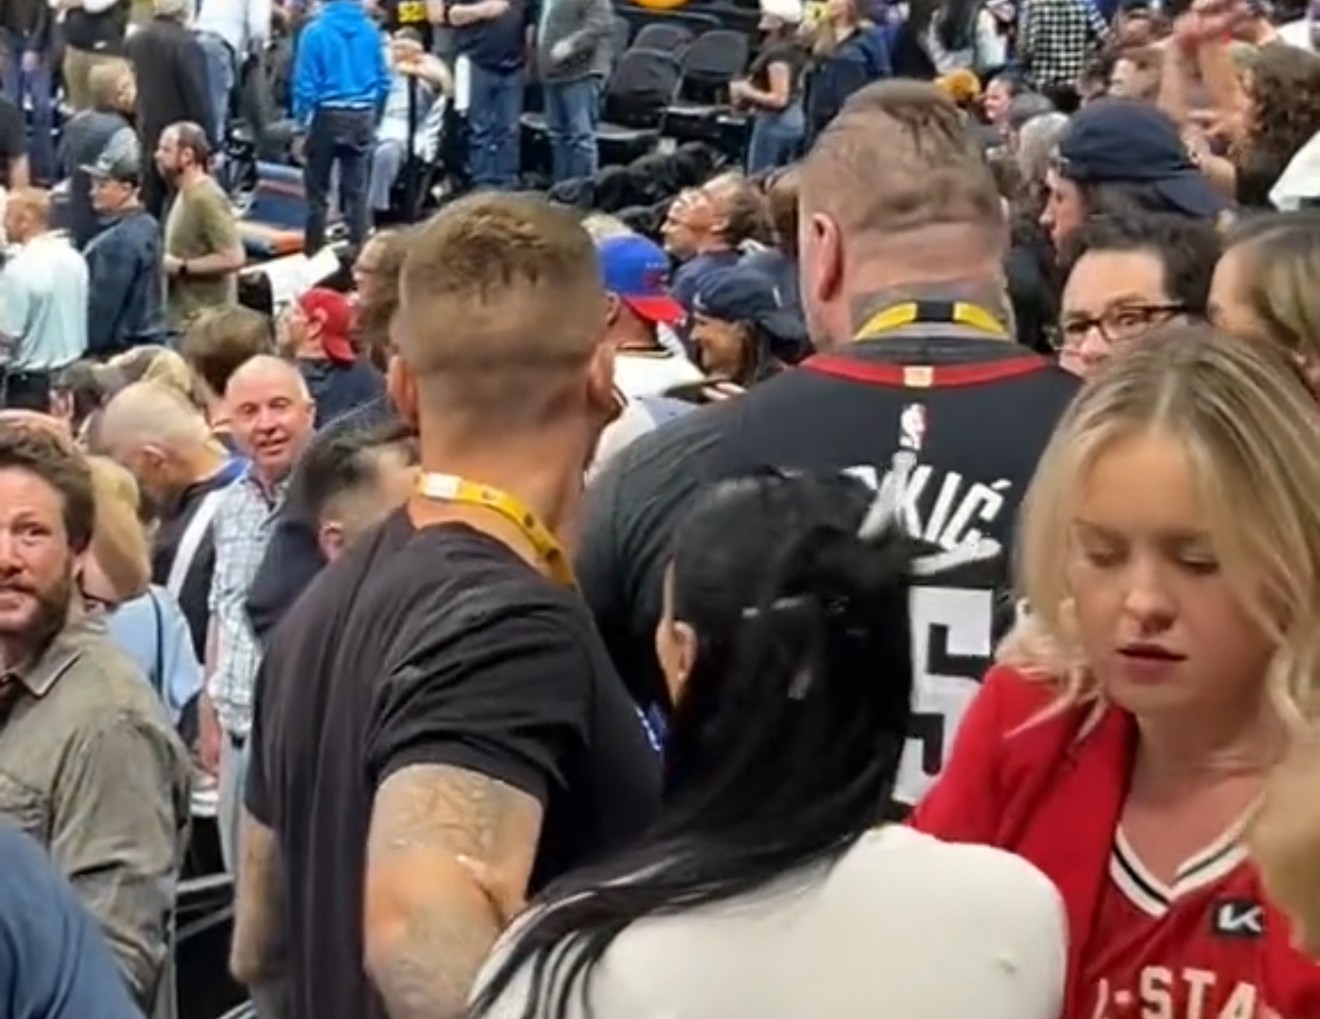 Strahinja Jokic was allegedly with Nikola Jokic's wife, daughter and their brother Nemanja when the melee was recorded.